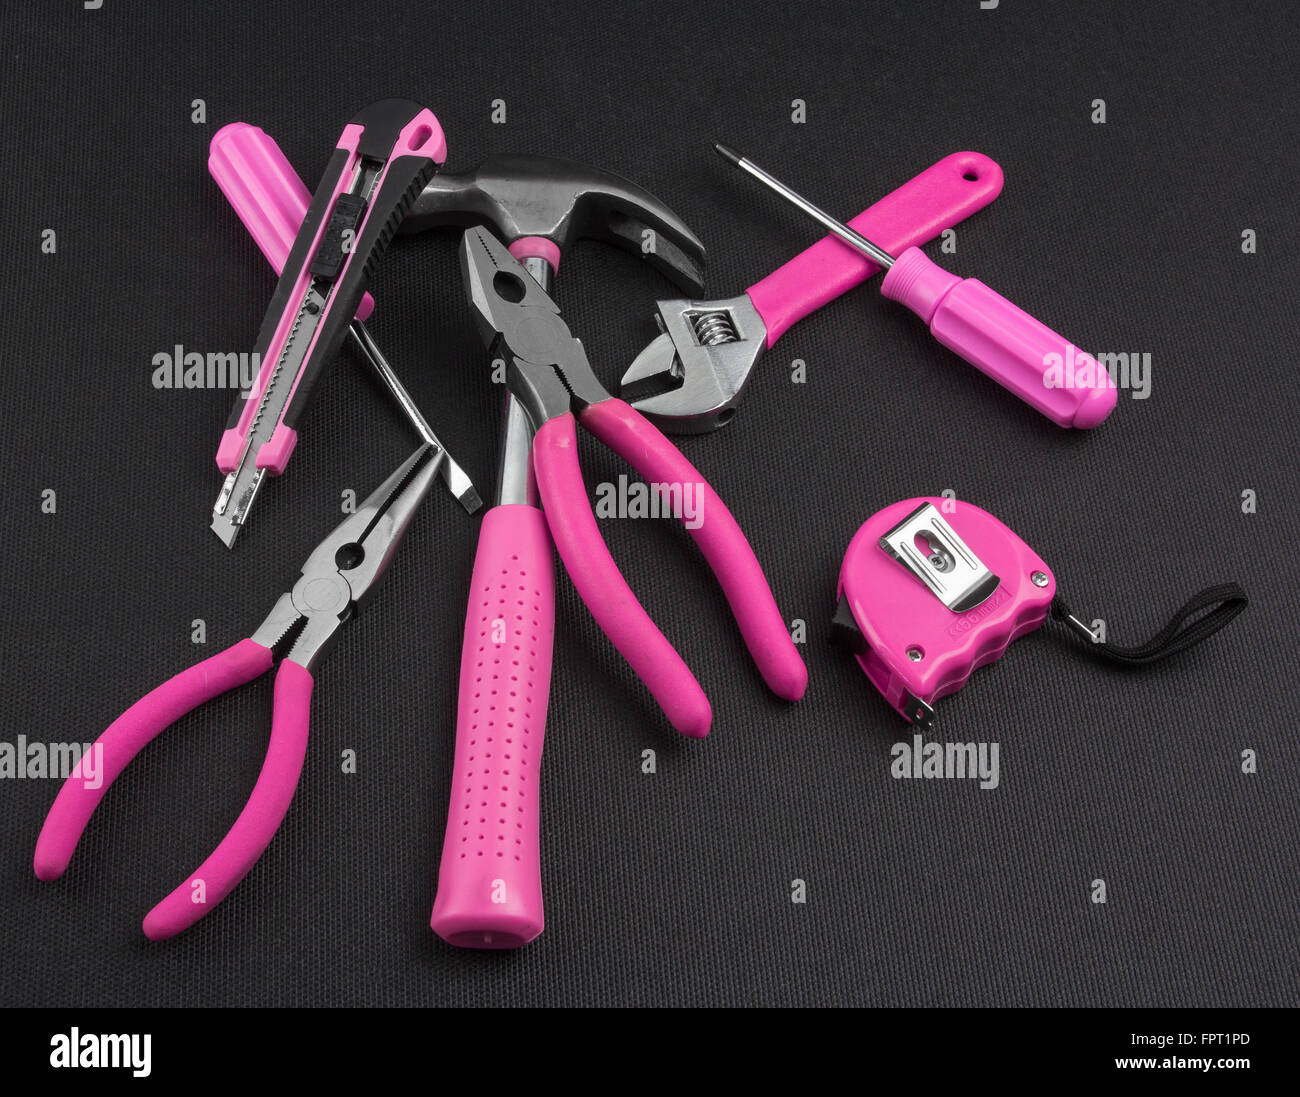 Stack of handy tools with pink handles Stock Photo